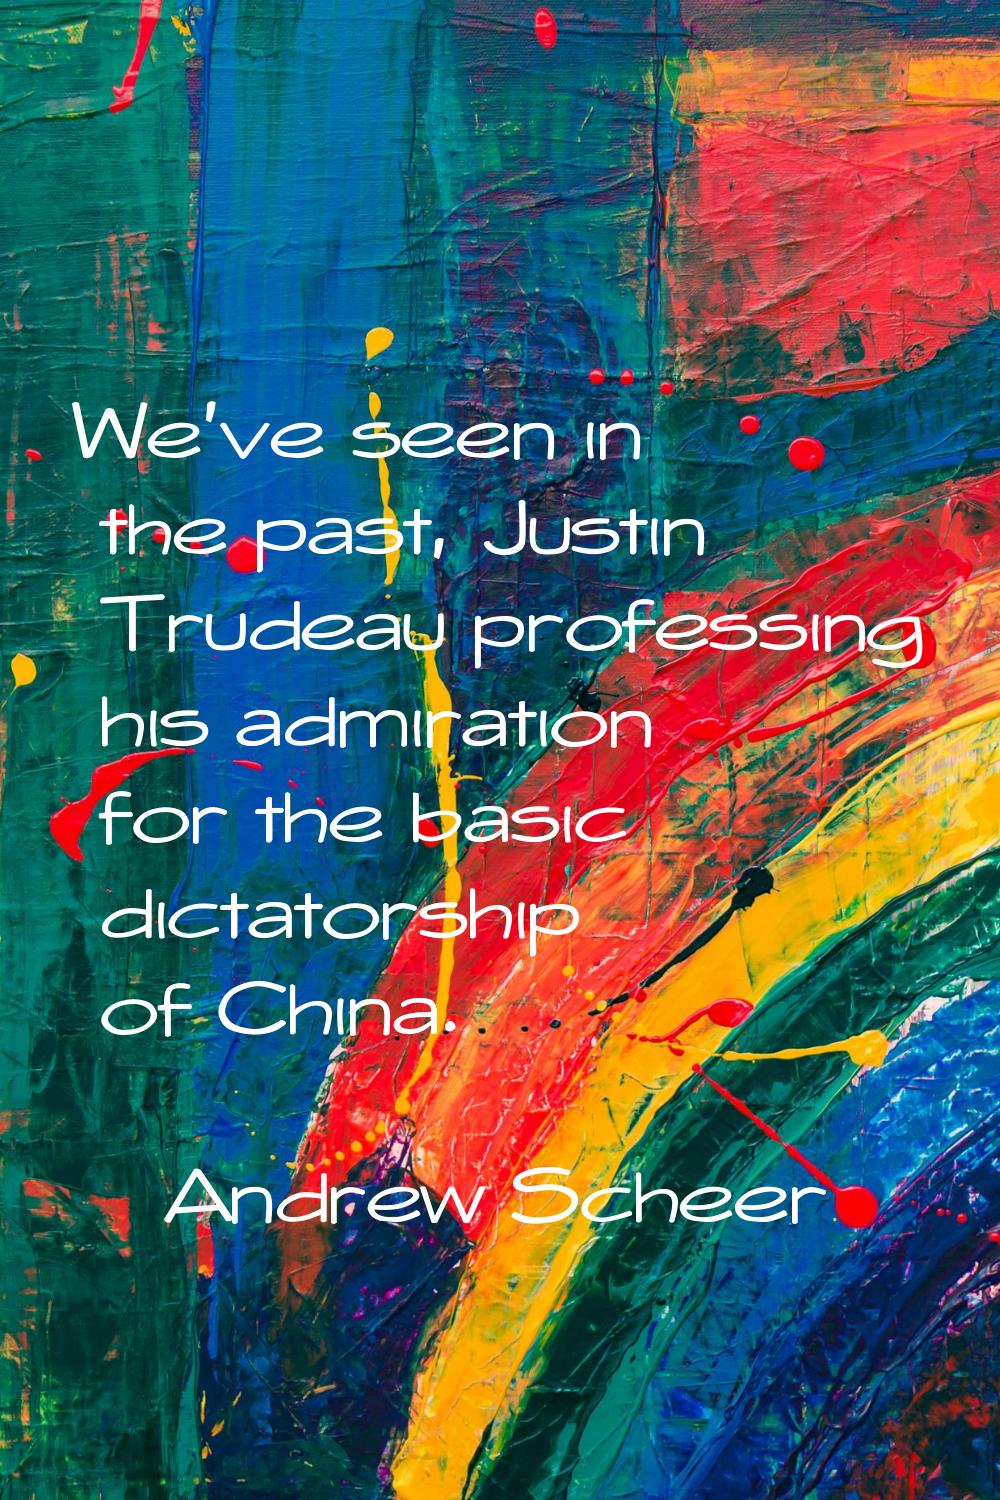 We've seen in the past, Justin Trudeau professing his admiration for the basic dictatorship of Chin